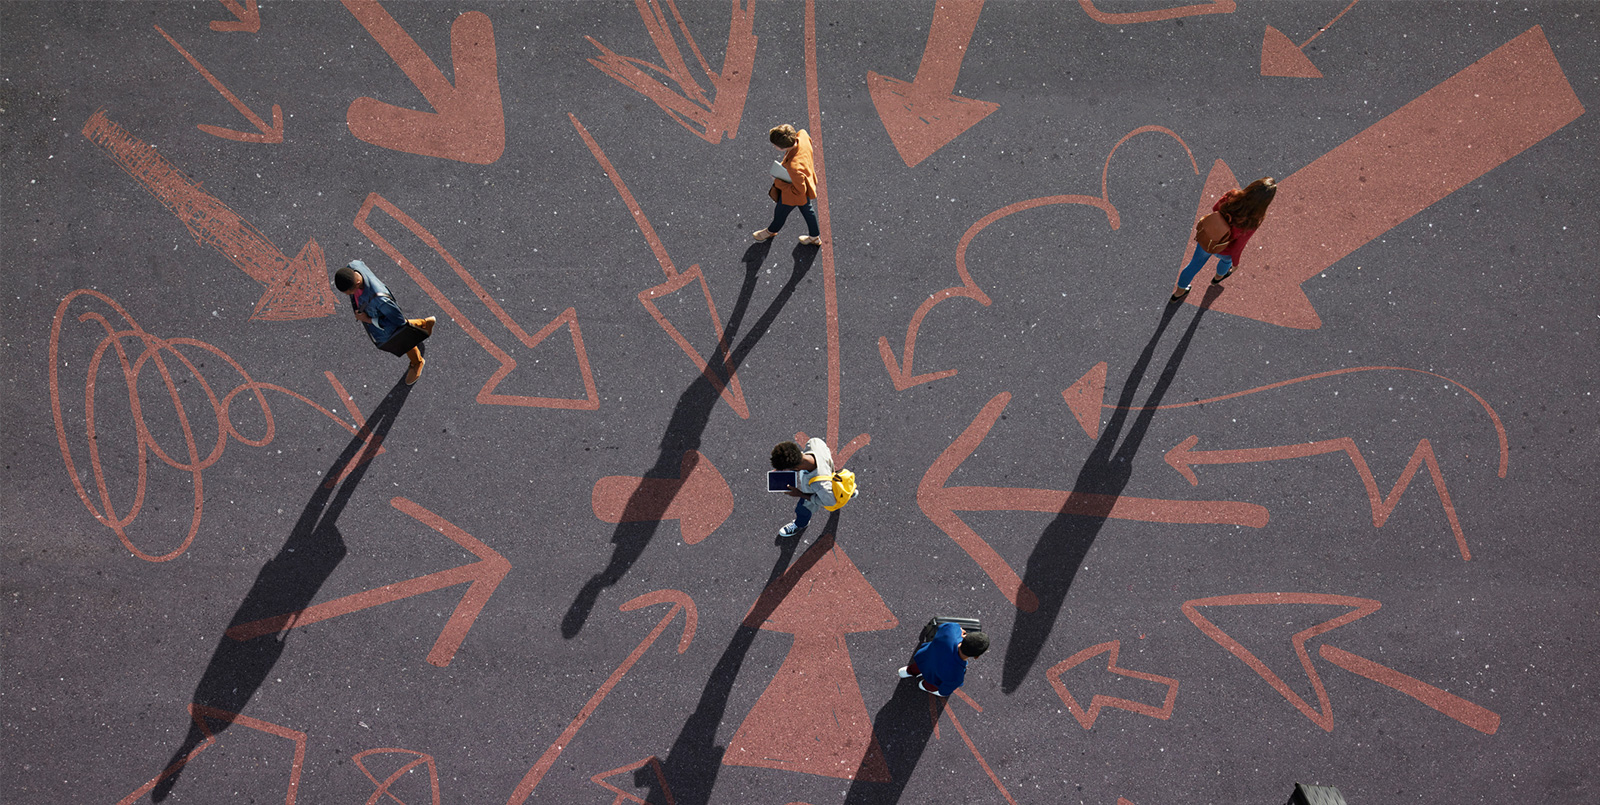 Five people walking around on a blacktop with red chalked arrows drawn on it